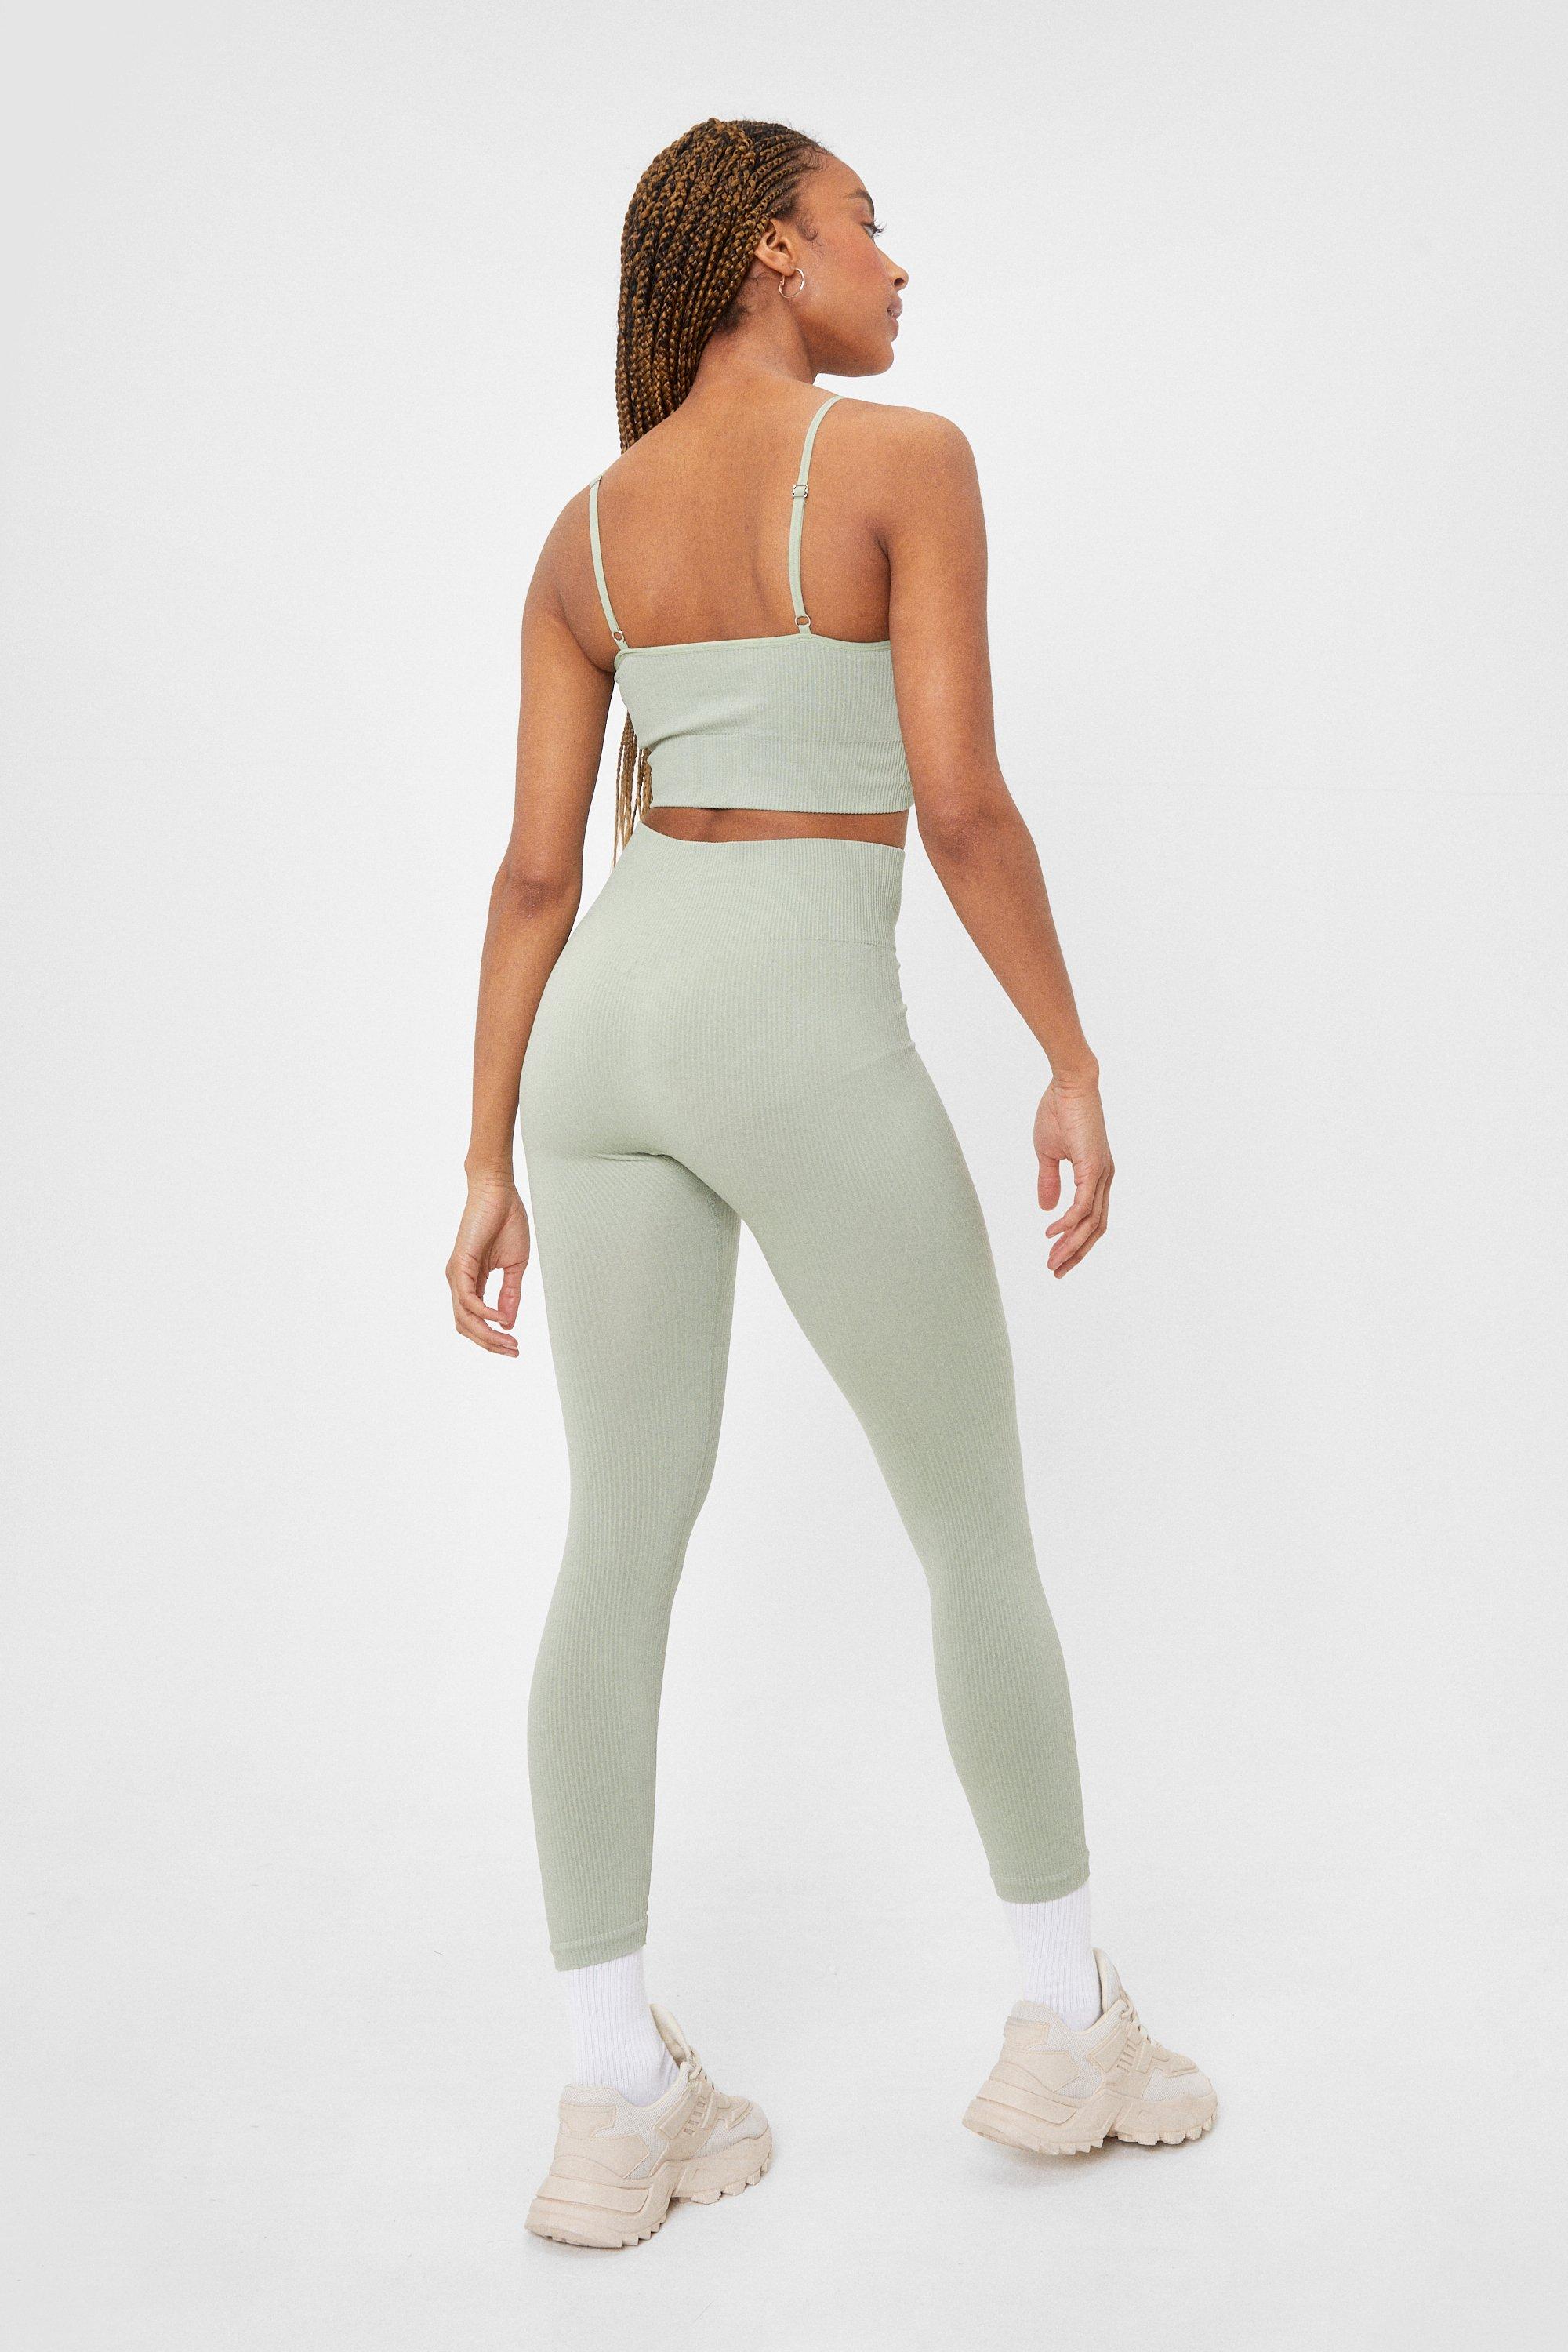 Buy Sage Green Ribbed Stretch Top & Leggings Set (7-16yrs) from Next